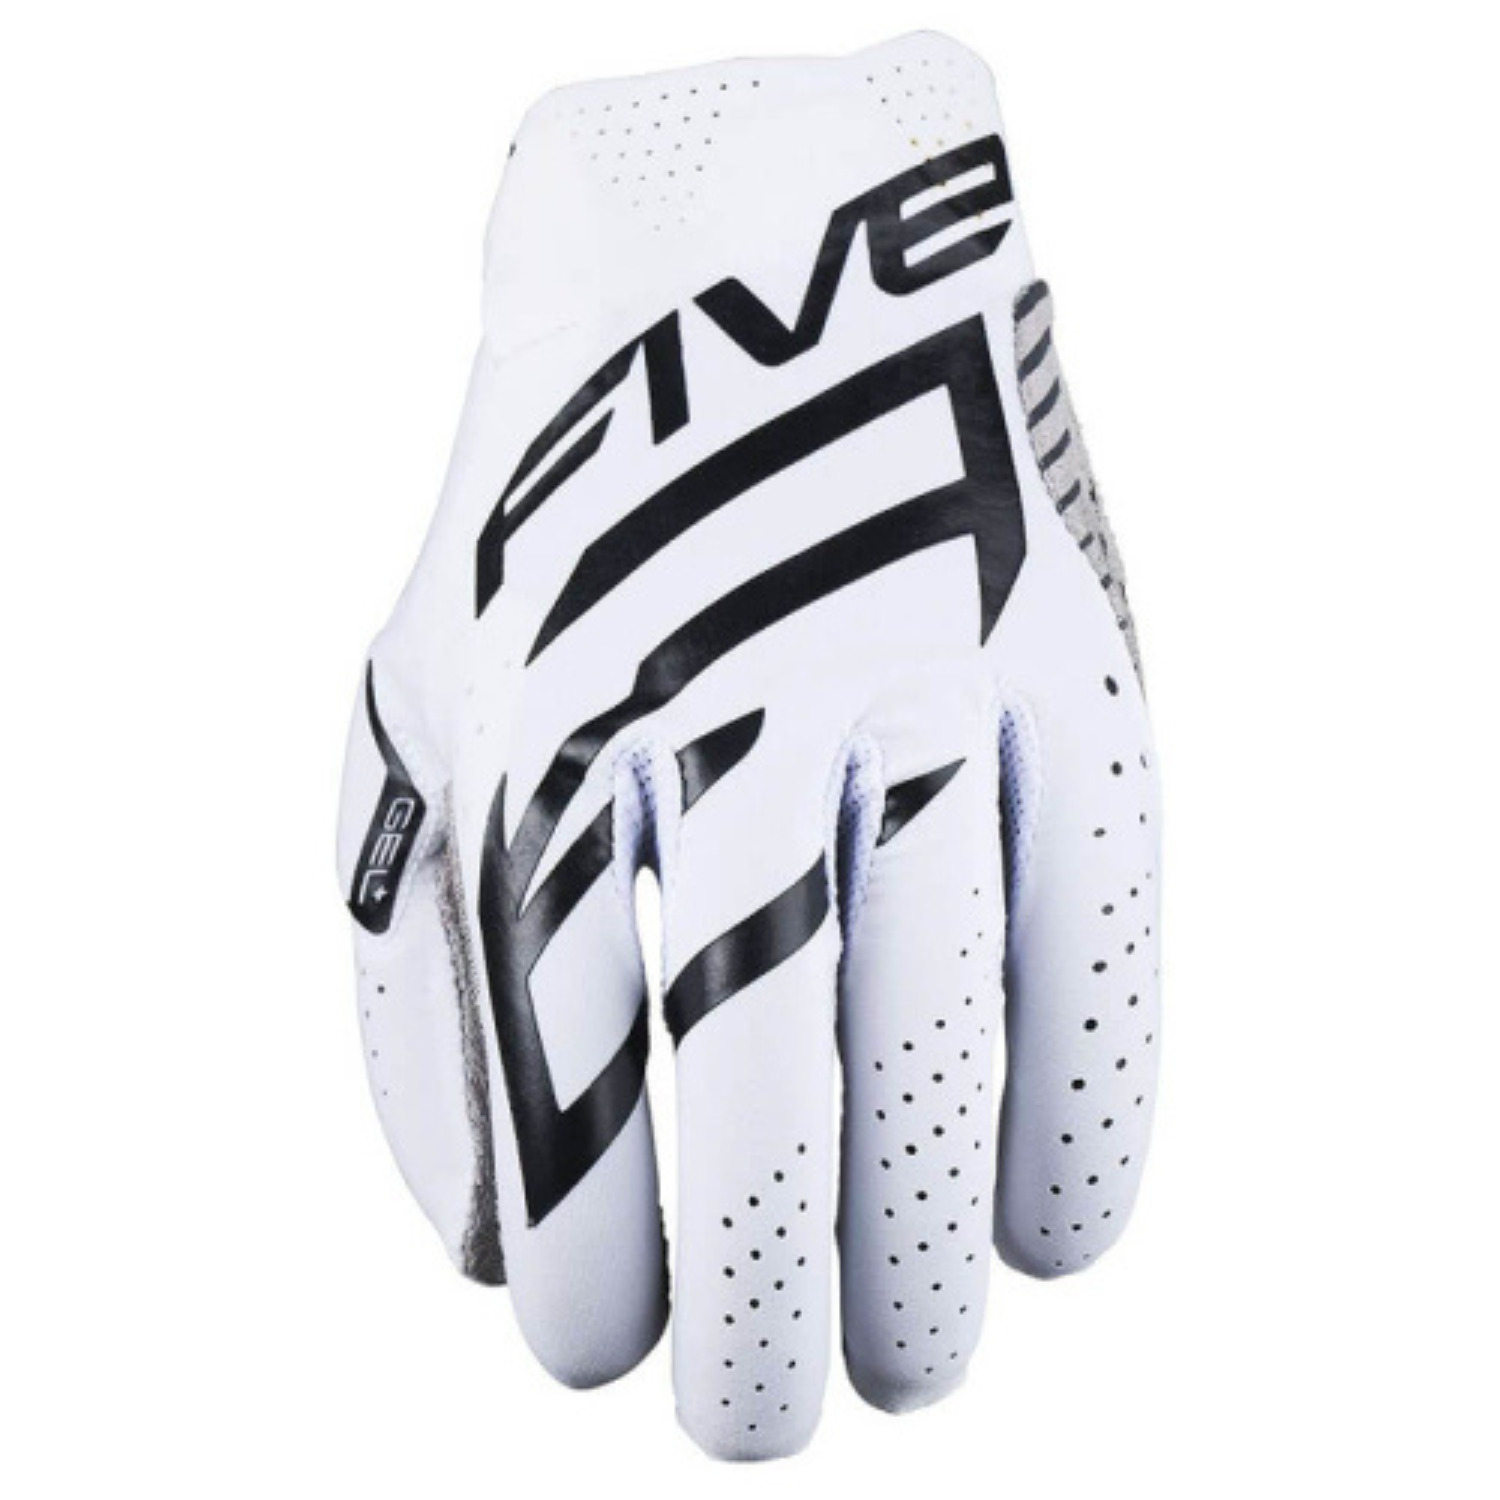 Image of Five MXF Race Gloves White Black Size 3XL ID 3841300111969